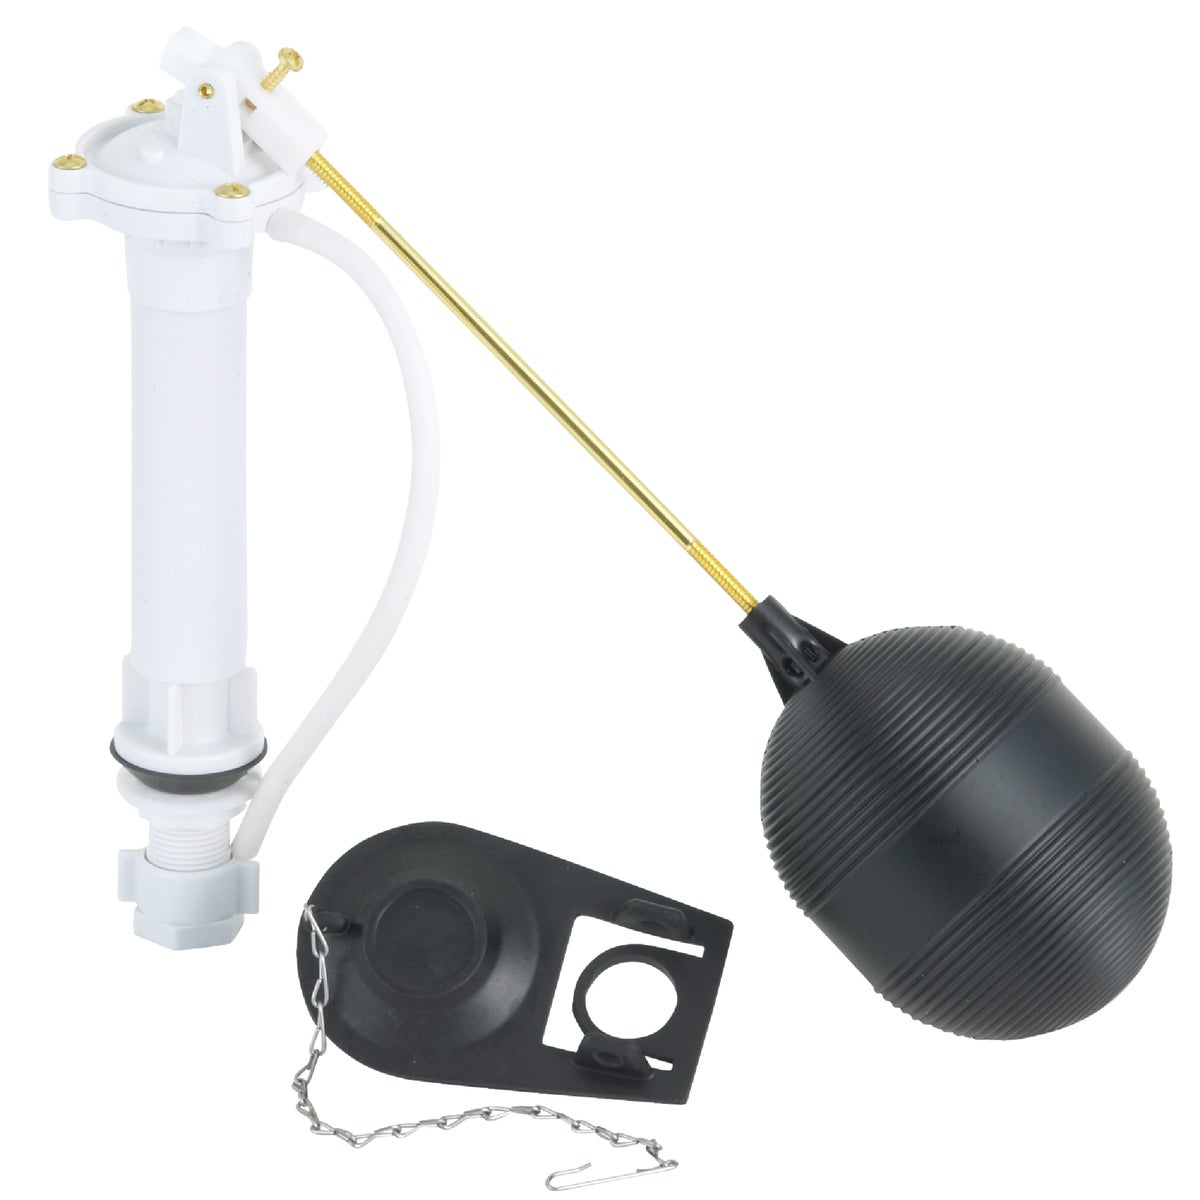 Item 426961, Includes 8-1/2" anti-siphon plastic ball cock, float rod, refill tube, 